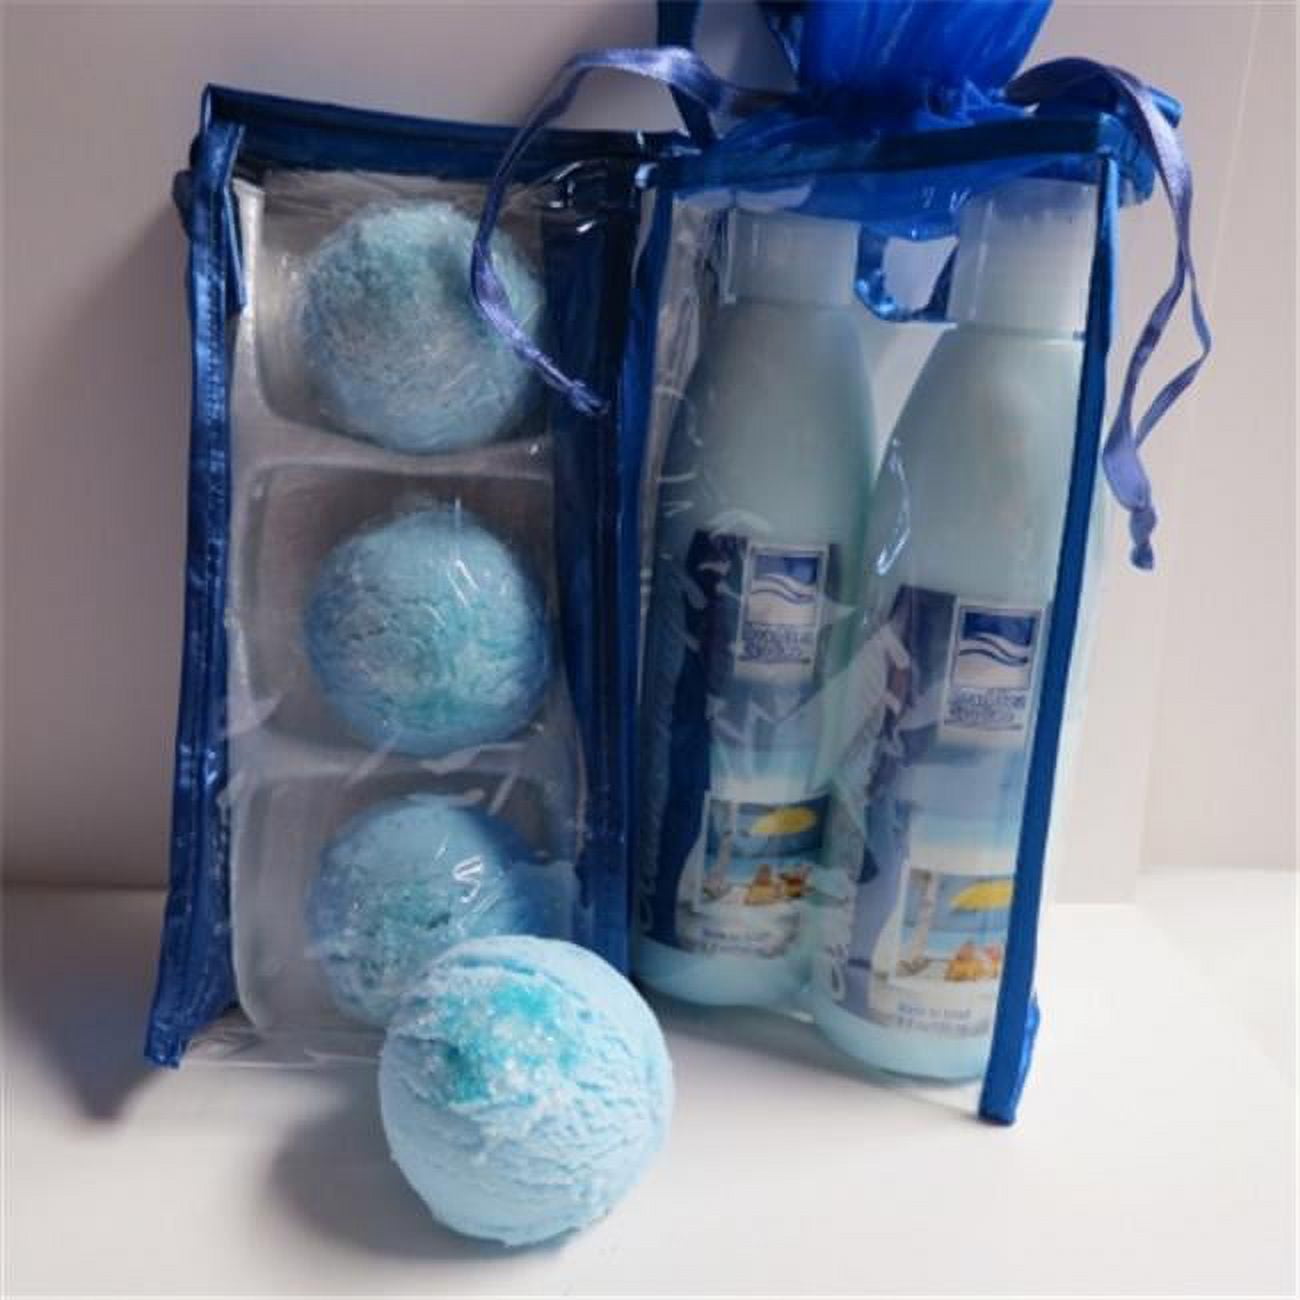 Deadsea-bbcow02 3 Pack Ocean Waves Bubble Bath Truffles, 2 Pack 8 Oz Ocean Therapy Hand & Body Massage Lotion